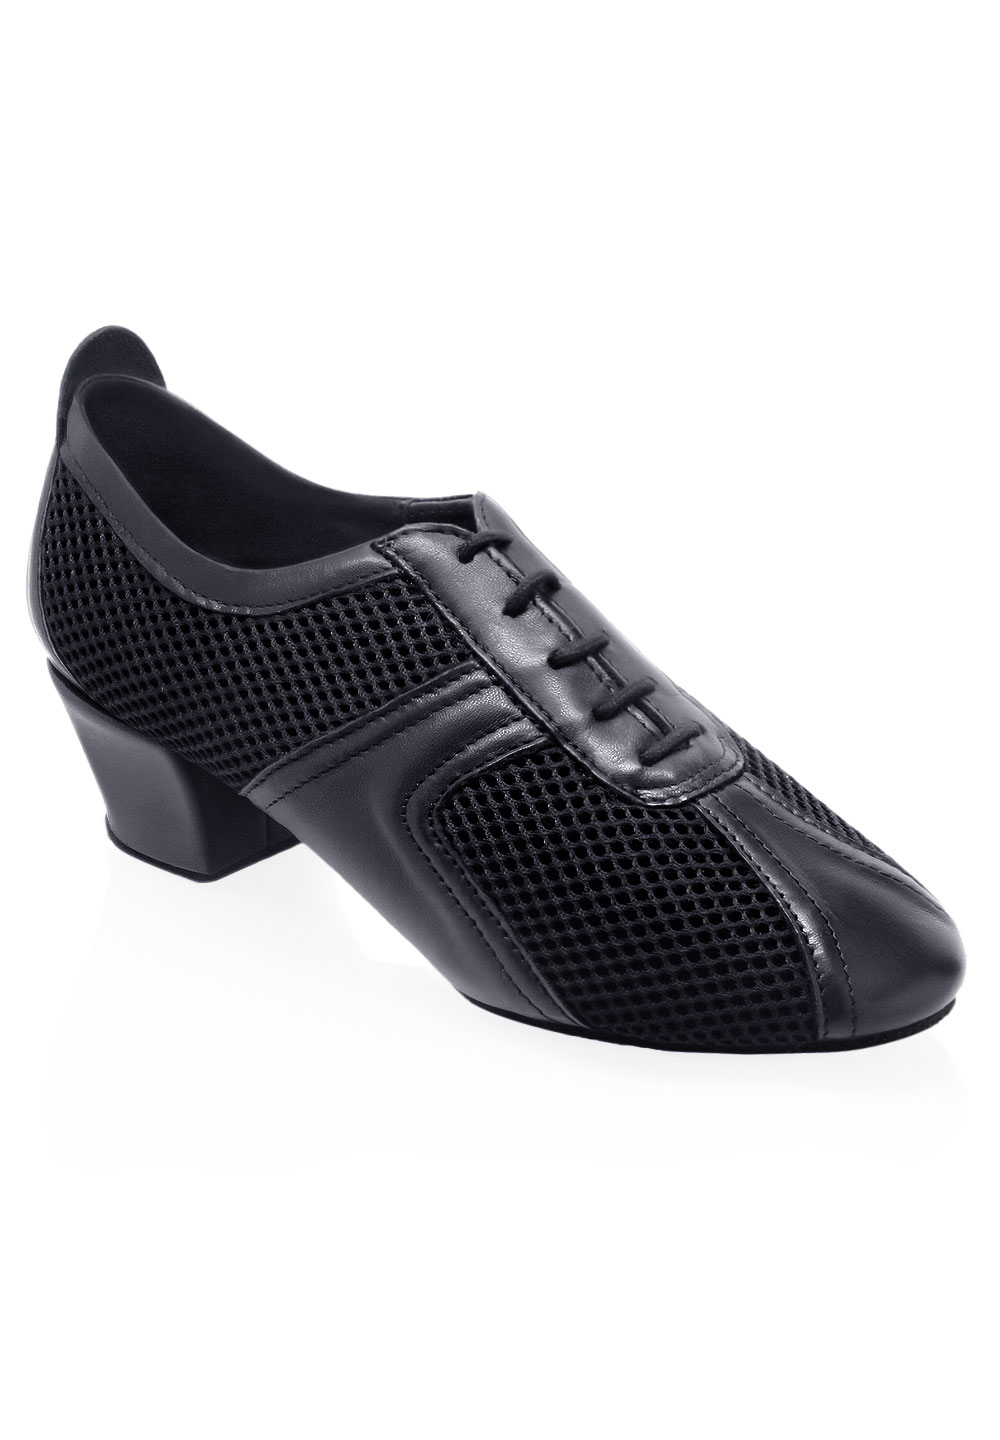 Ray Rose Breeze Practice Shoes 410 | Practice Dance Shoes